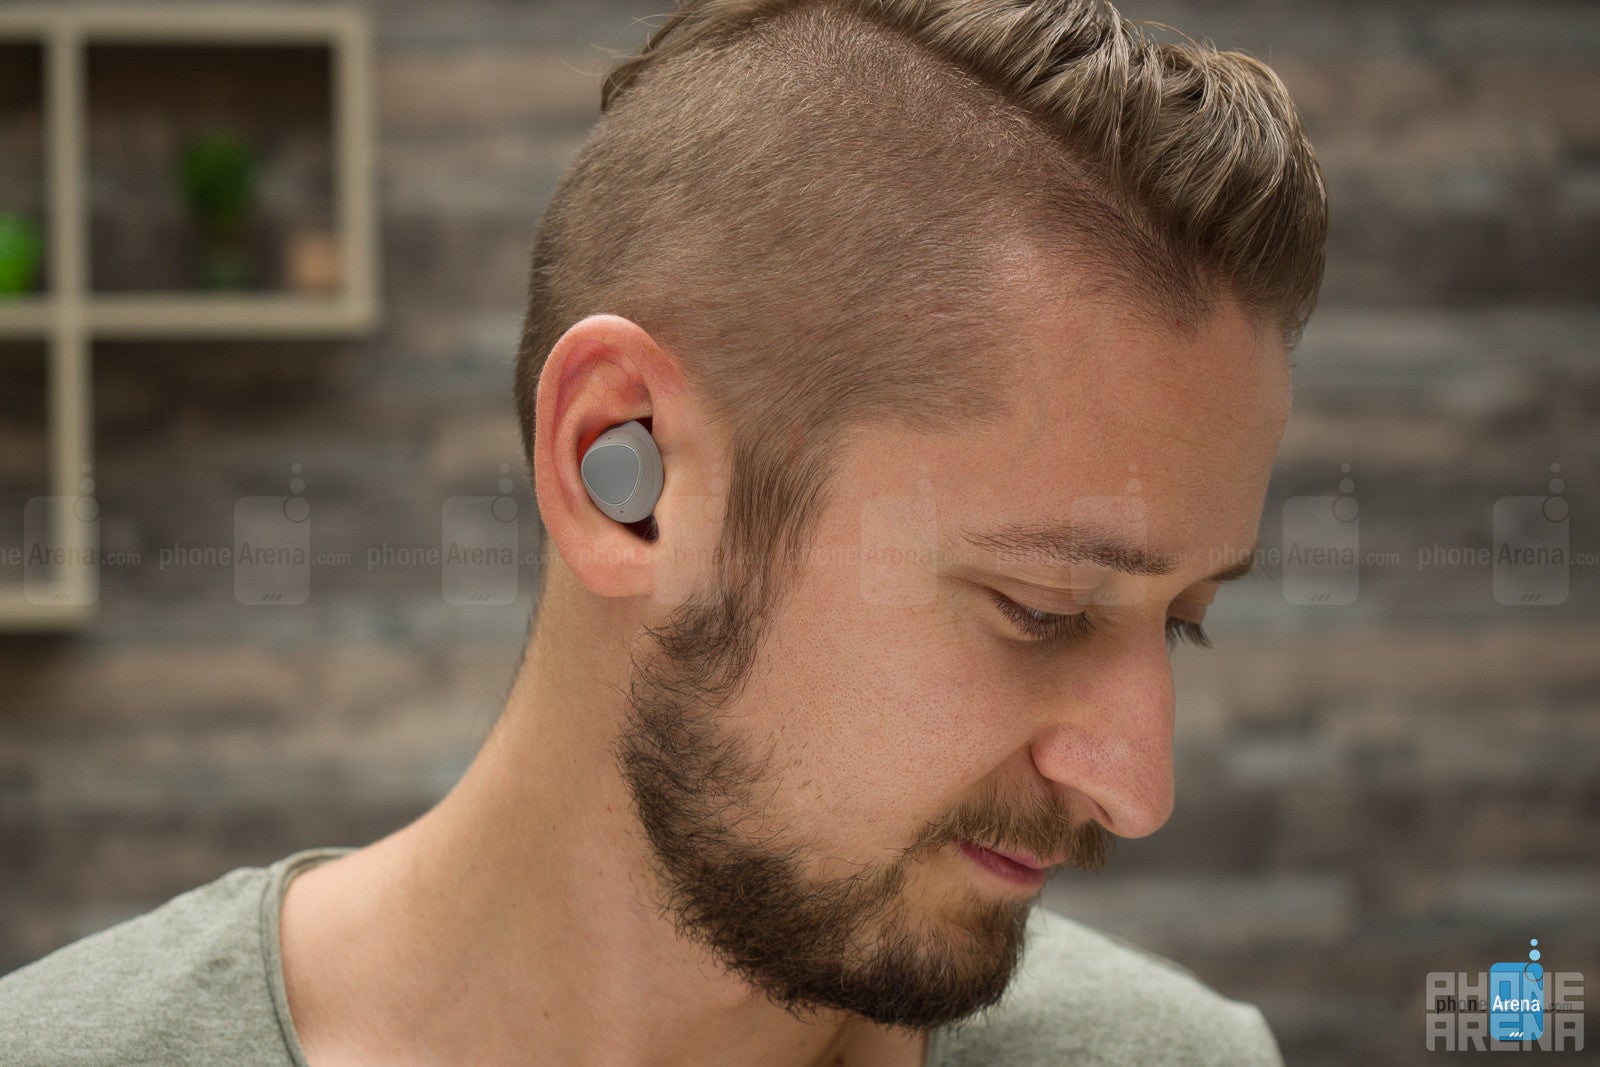 Samsung Gear IconX 2018 headphones Review